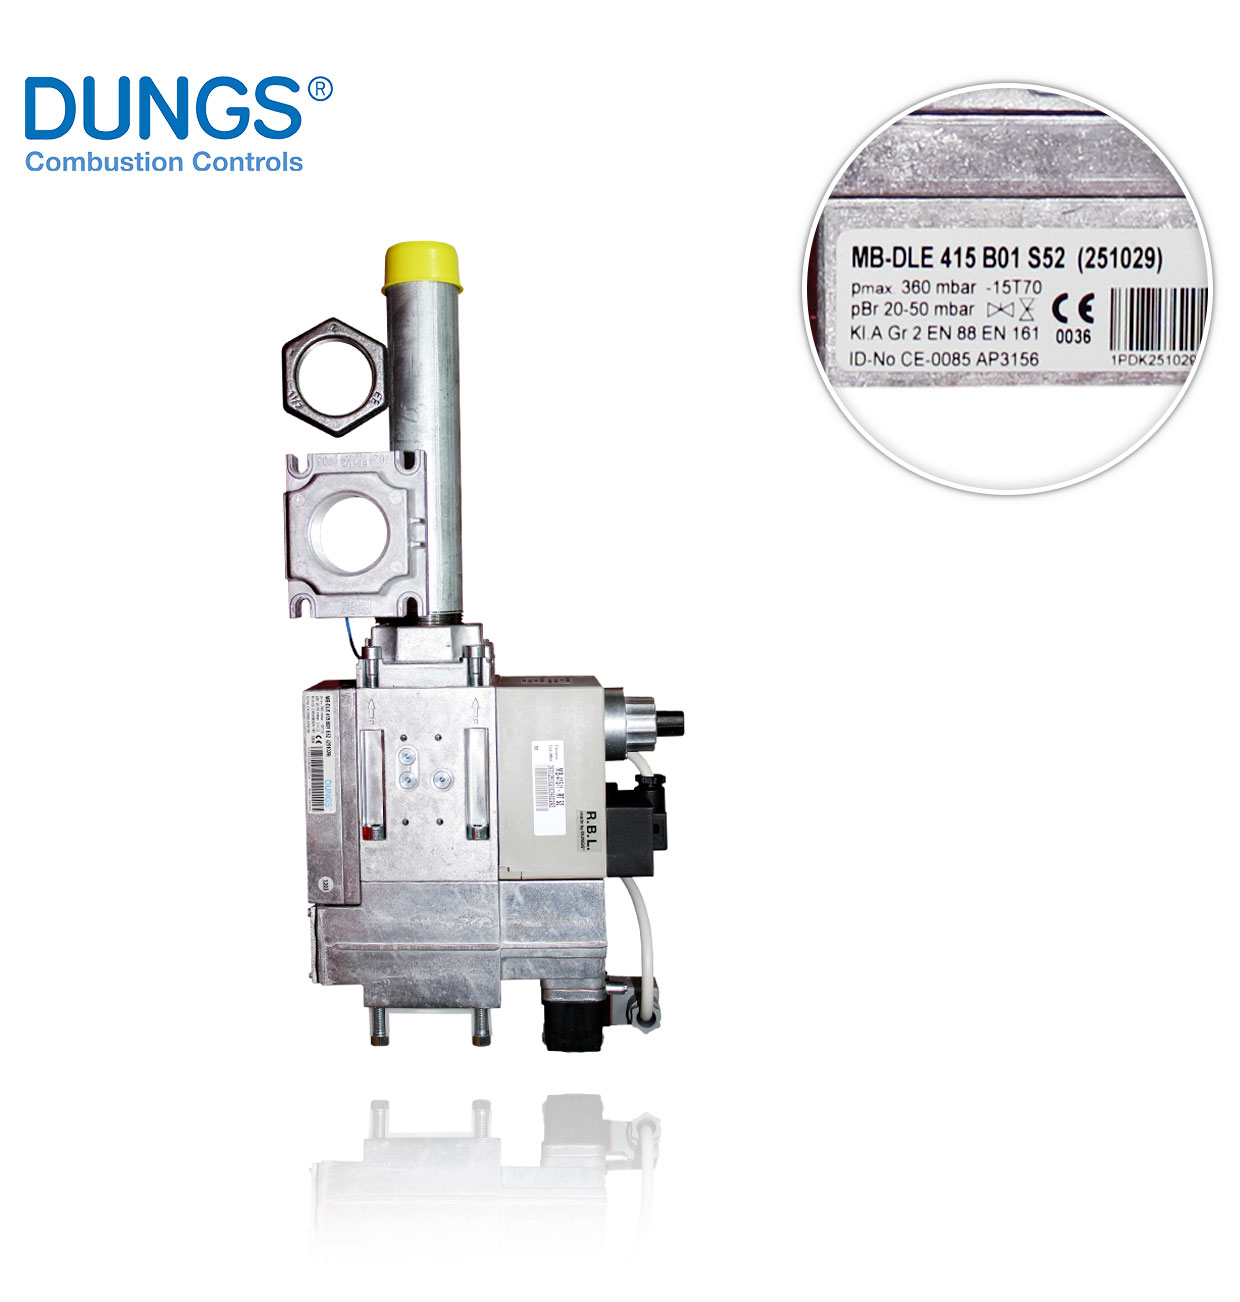 MB-DLE 415 B01S52 R1"1/2 DUNGS + Rampa gas 224474